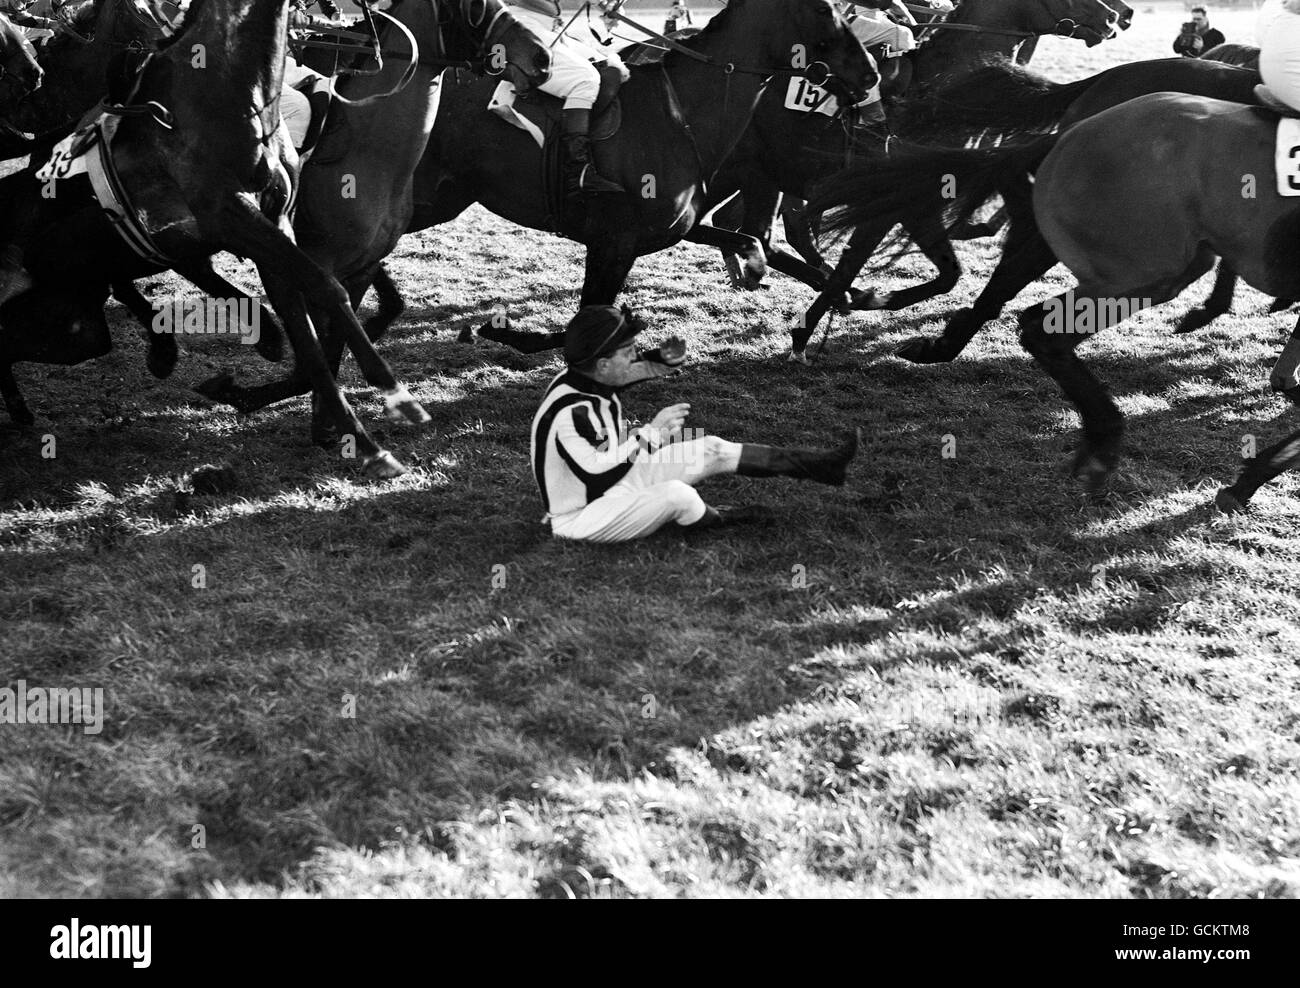 The Compton Novices' Hurdle Race. R.Morrow falls from Mr. R.H.Corbertt's 'Gamp' at the first hurdle. Stock Photo